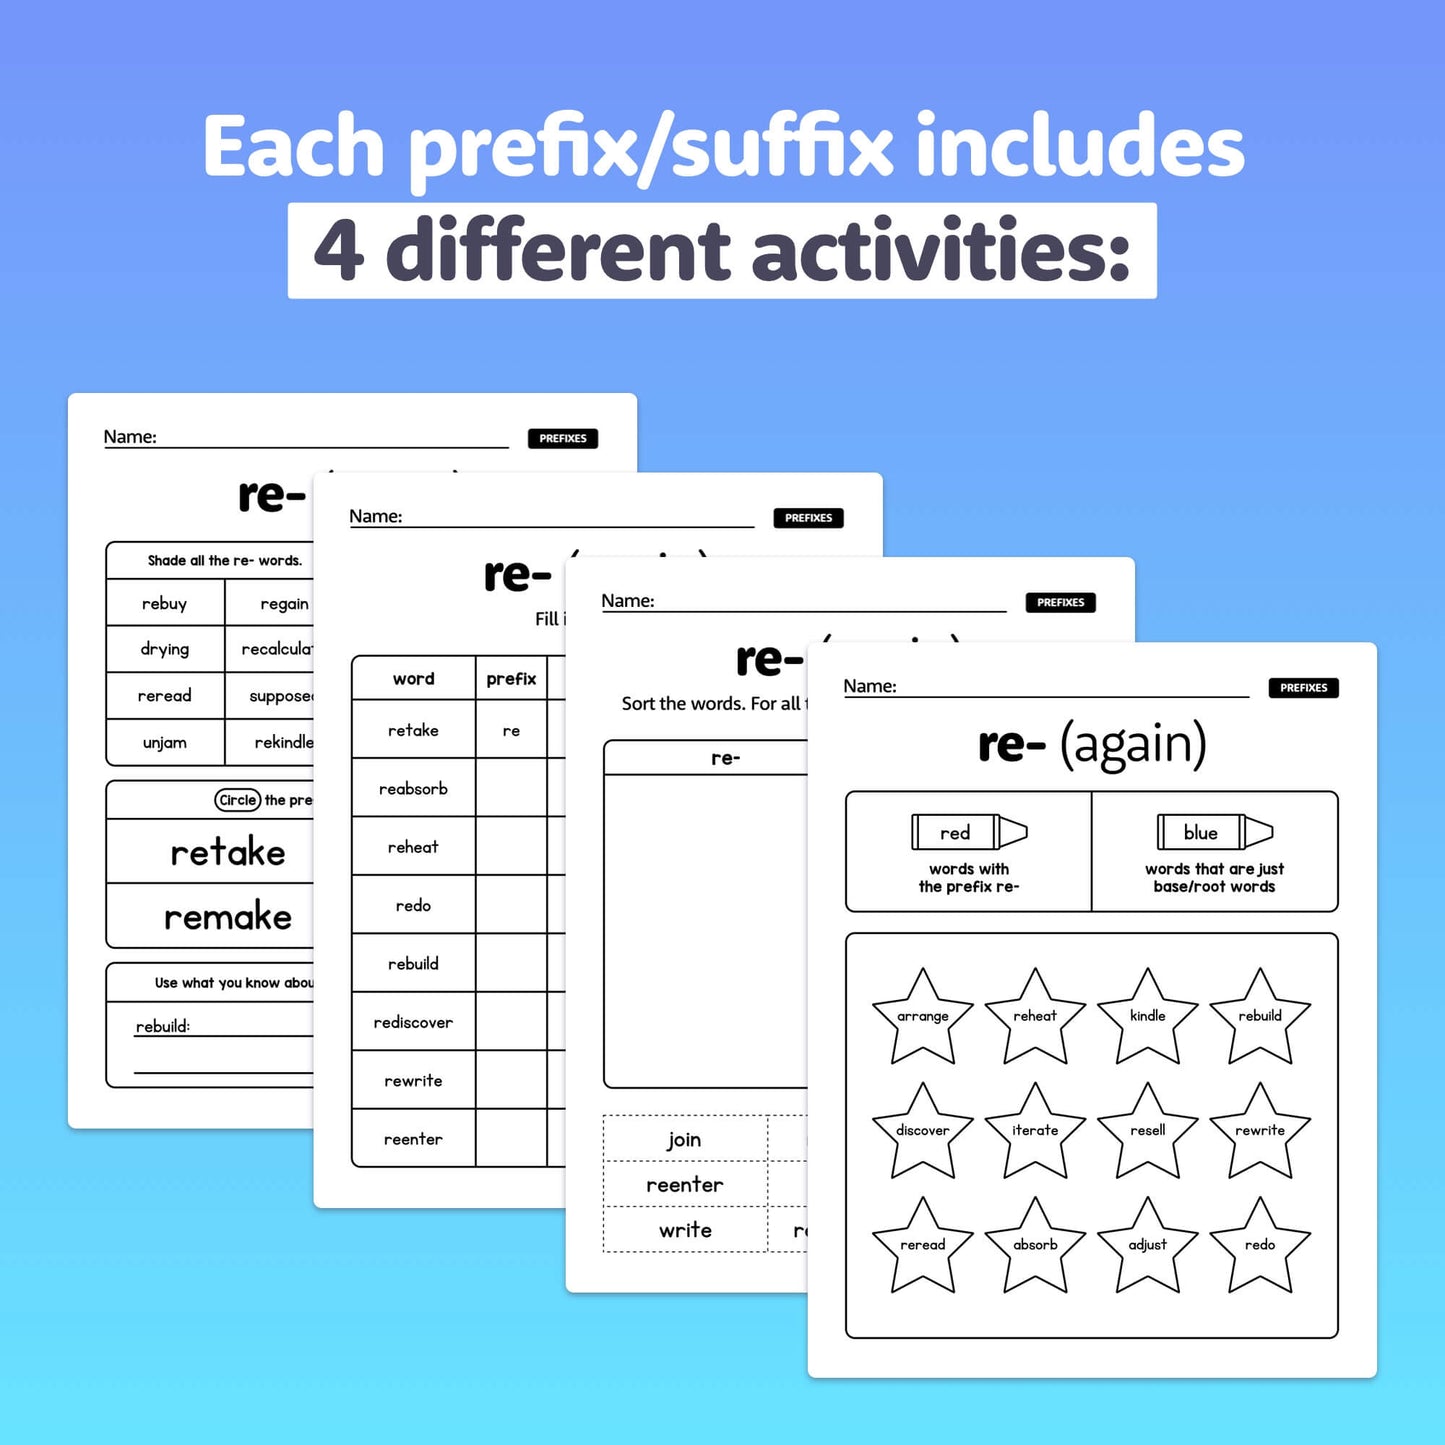 Prefixes and Suffixes Worksheets